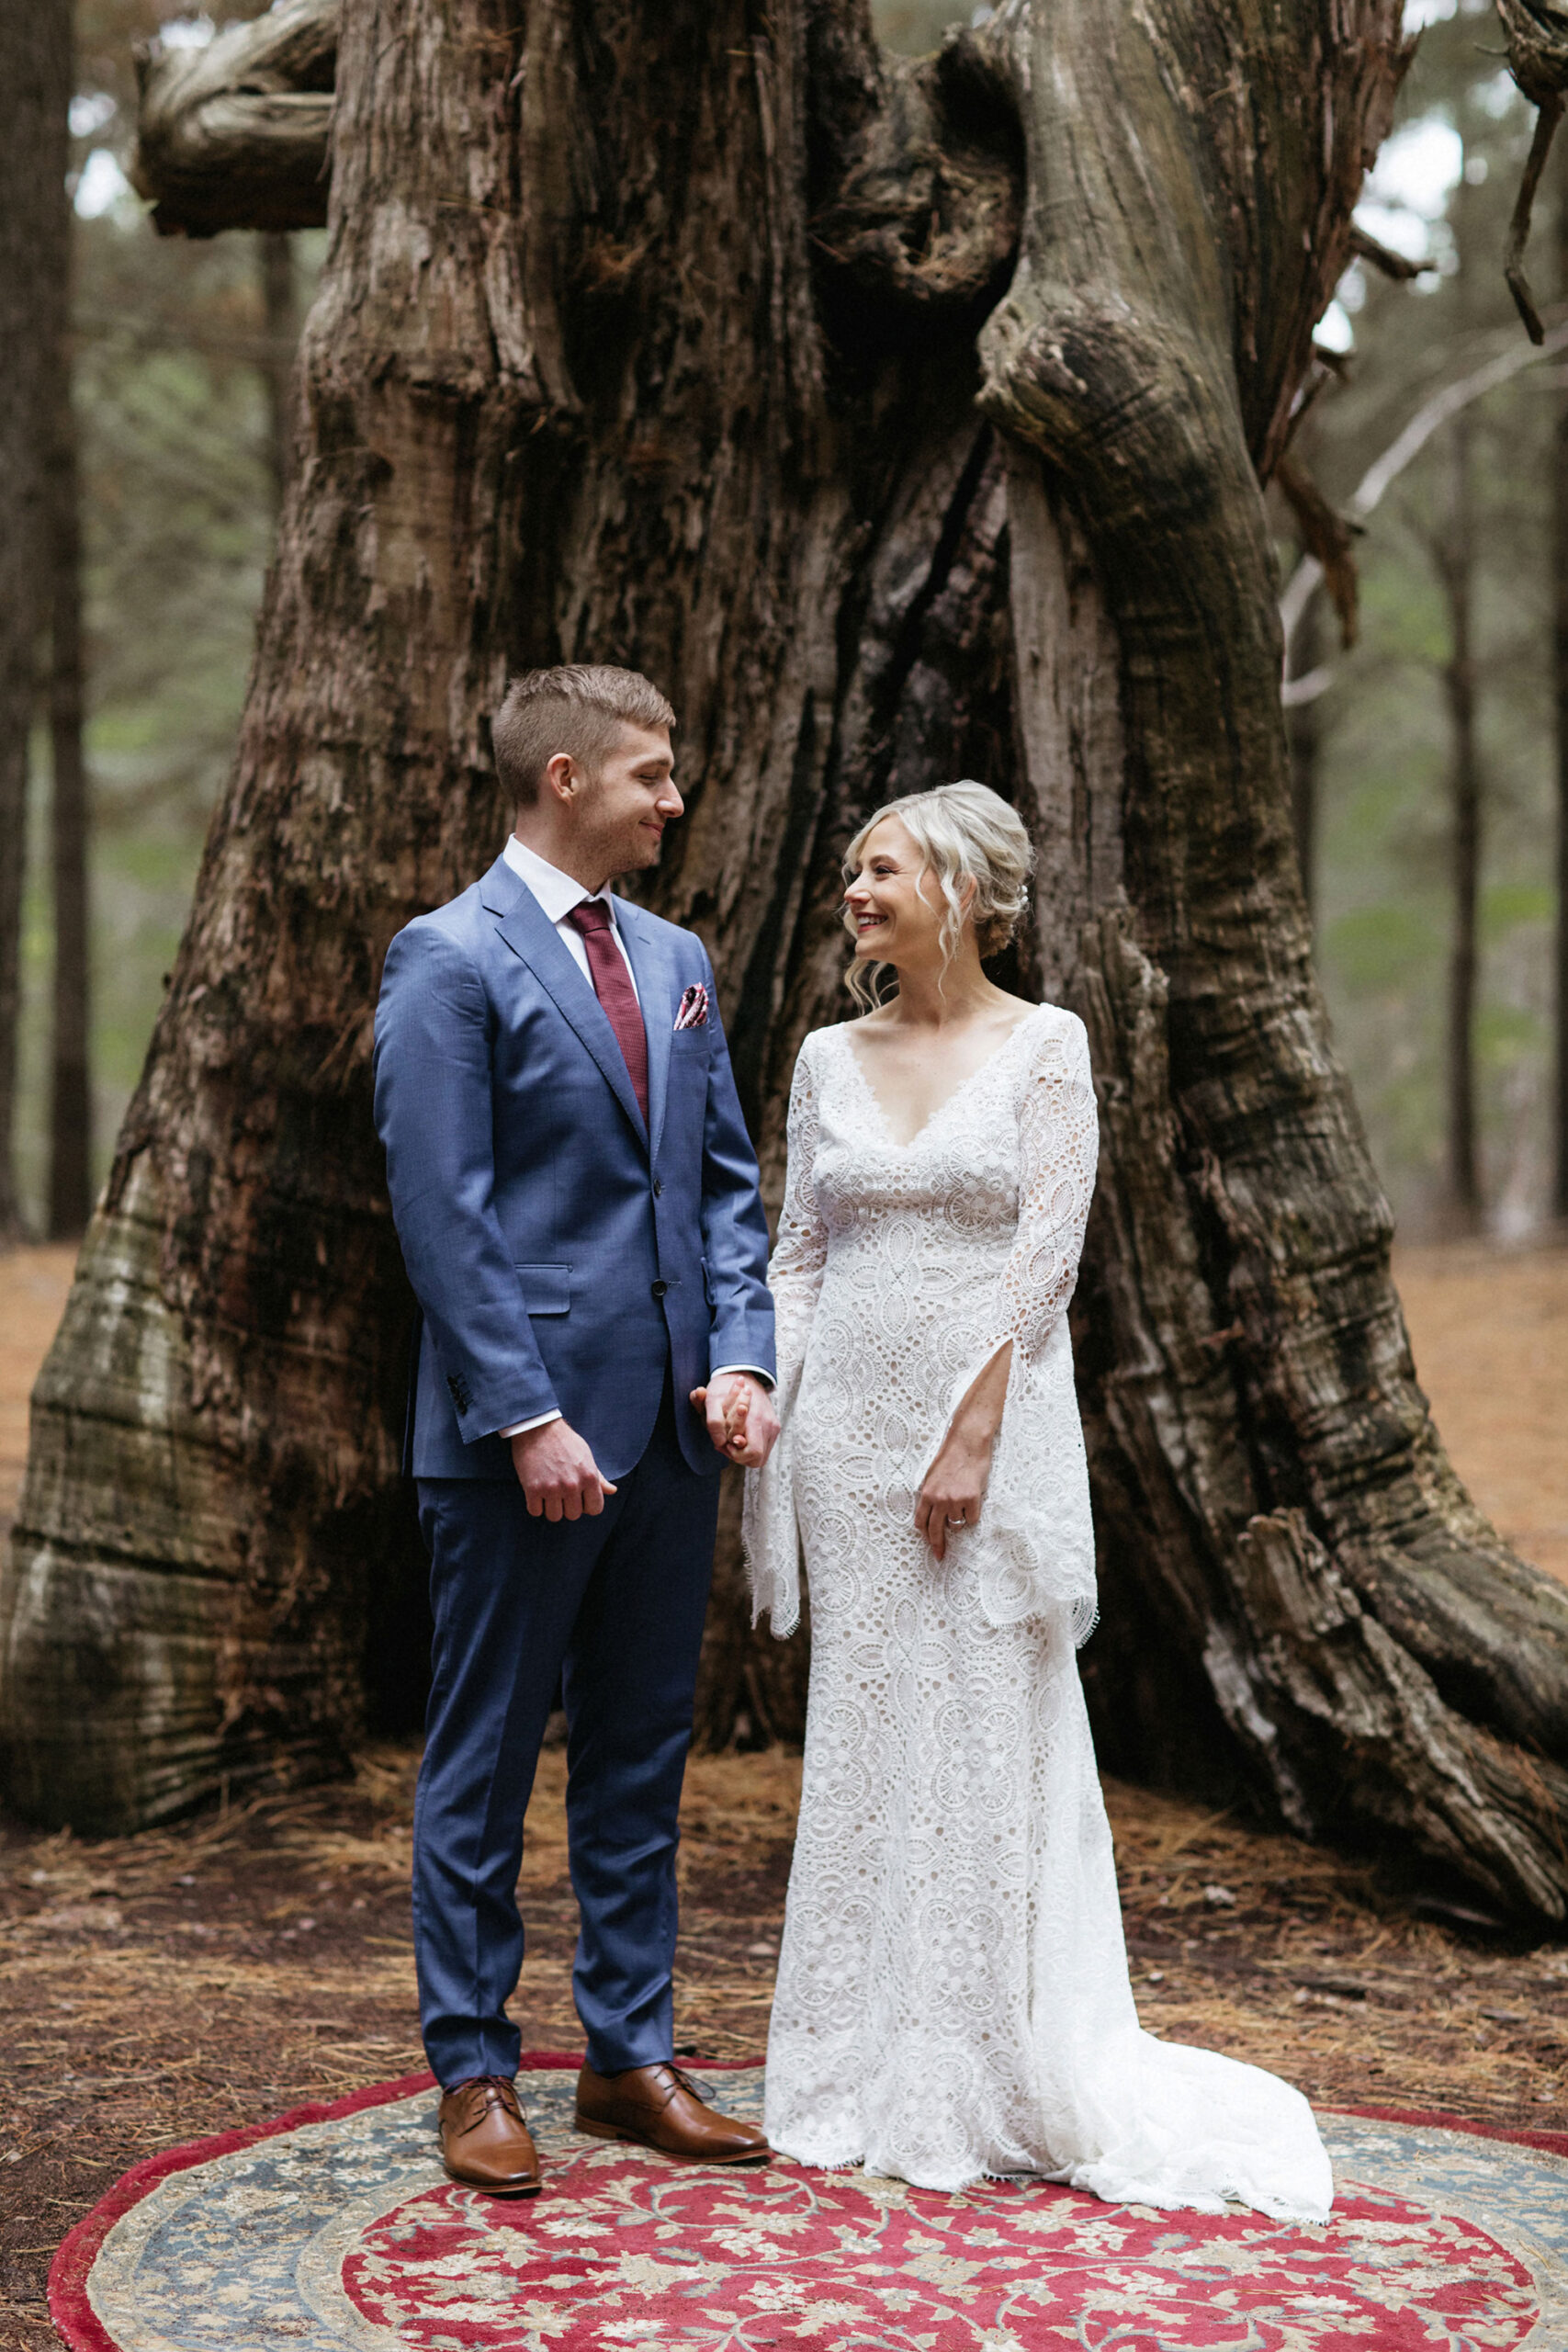 Bec Shaan Forest Country Wedding Dan Evans Photography SBS 018 scaled